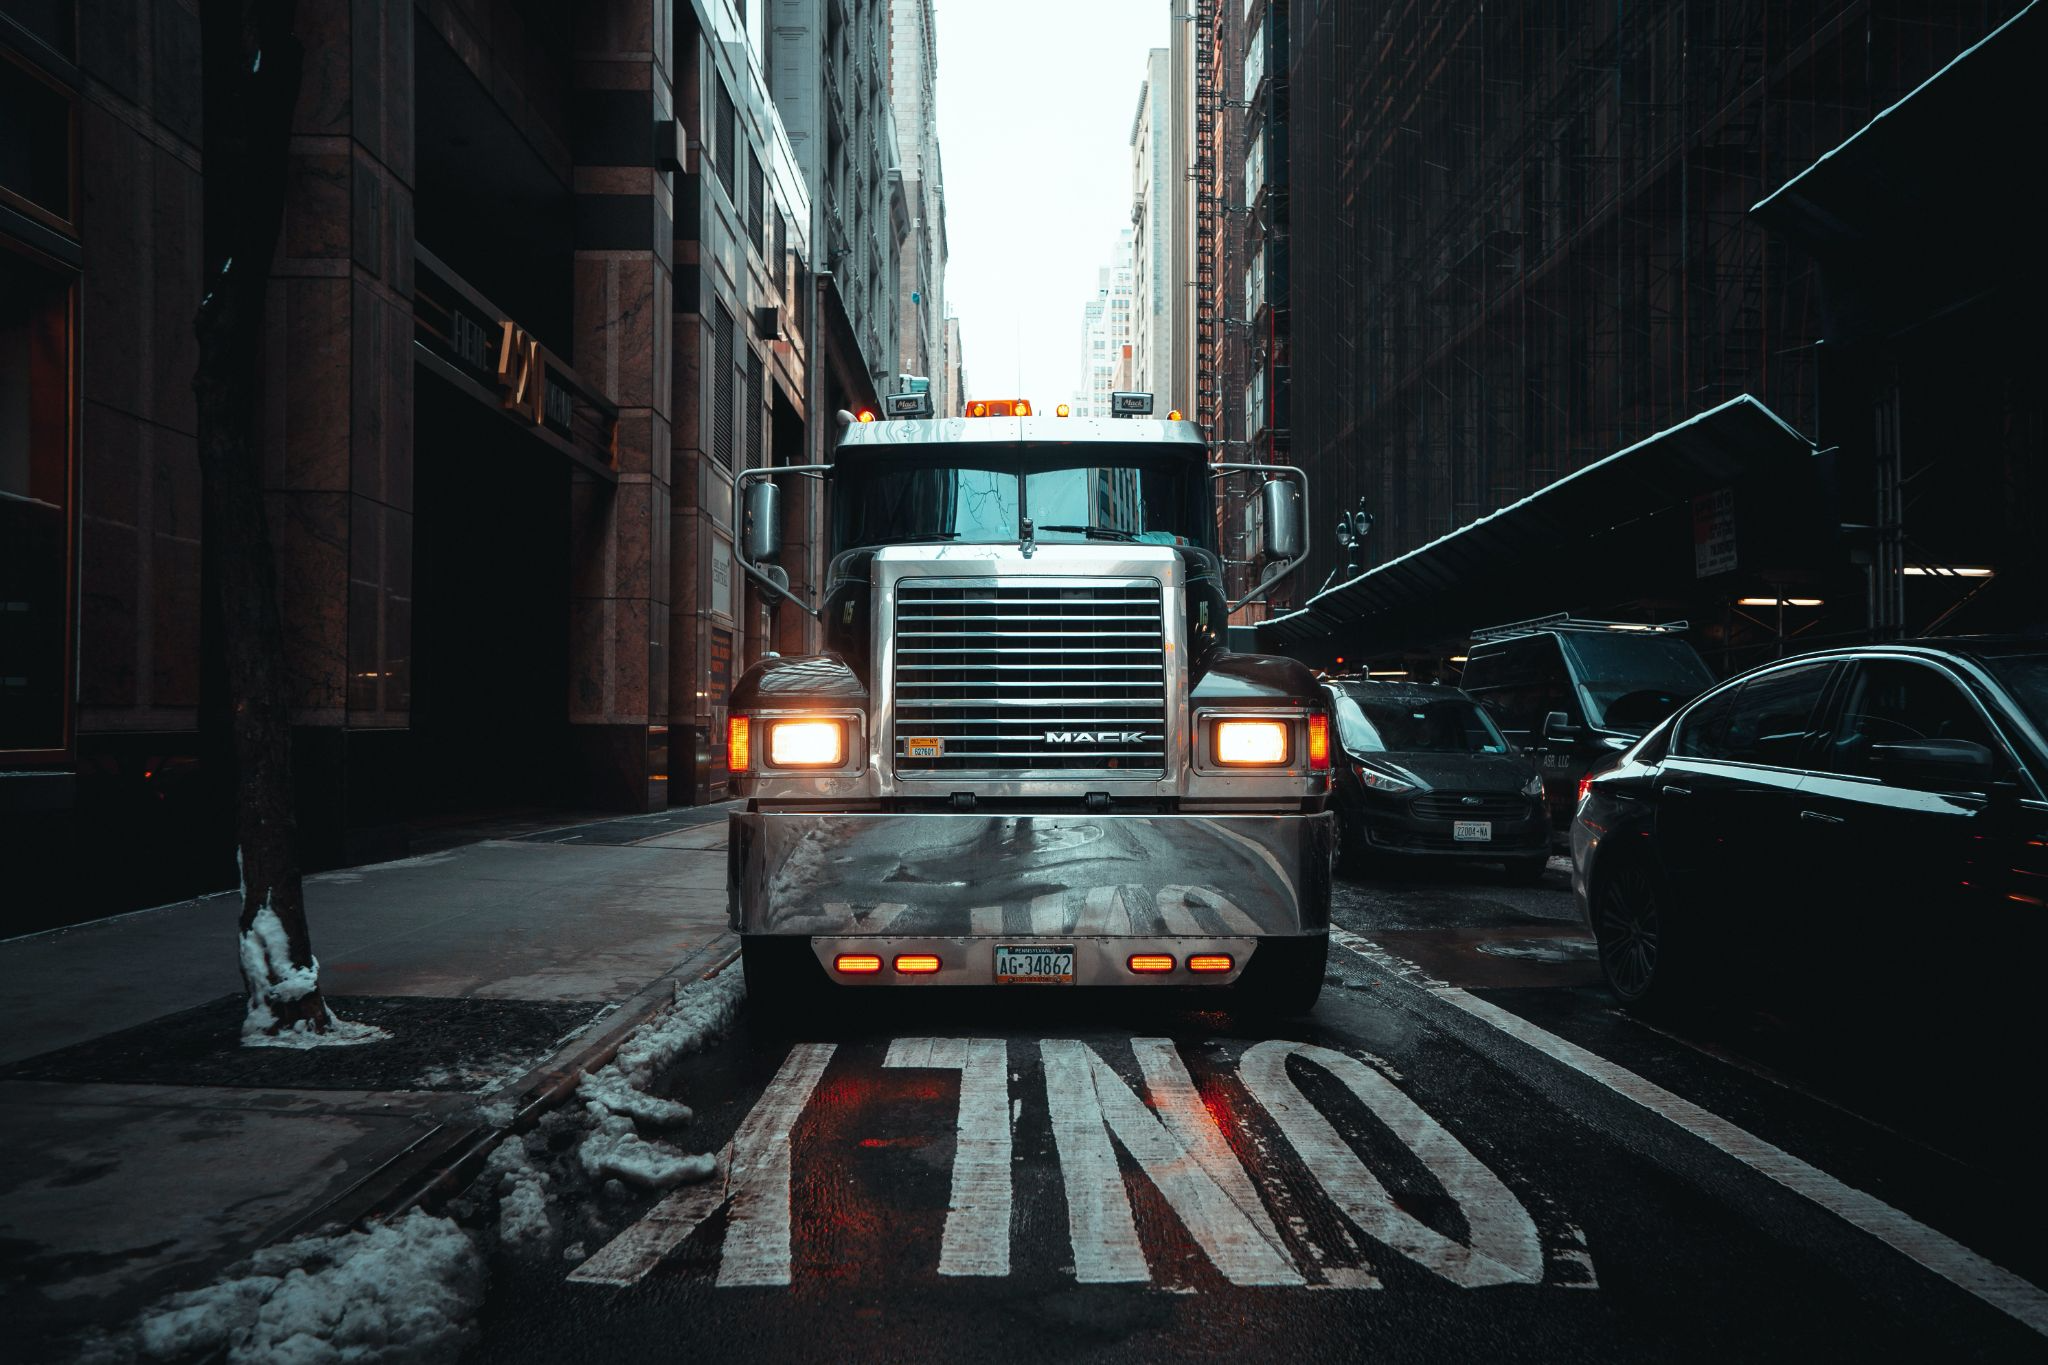 Grill of a semi truck in a narrow alley